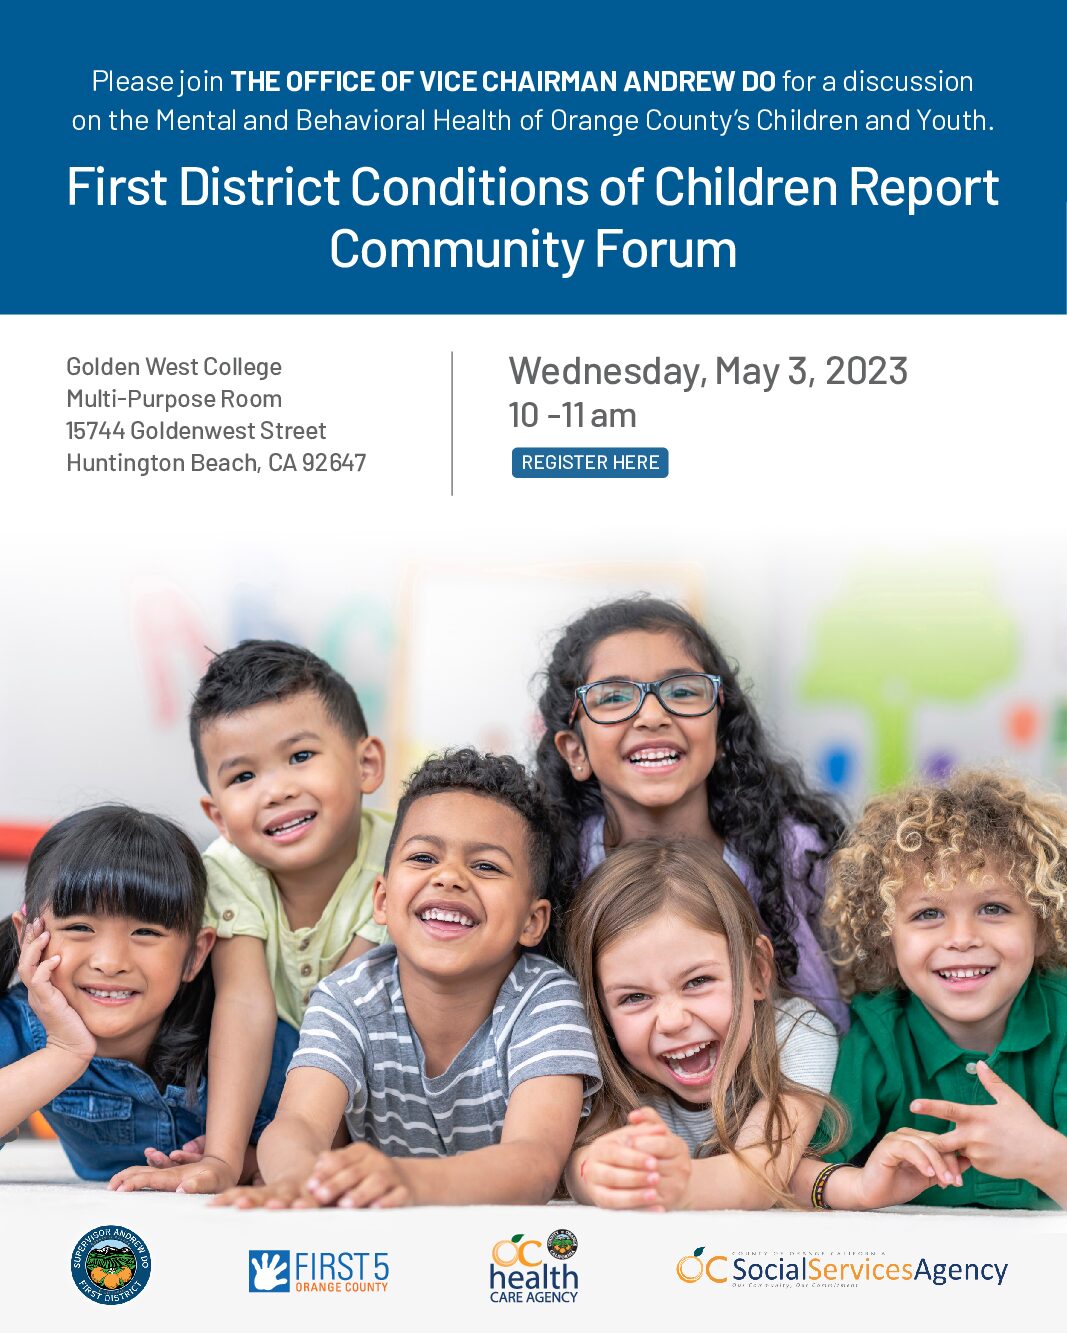 Join the Office of OC Vice Chairman Andrew Do for Conditions of Children Forum on May 3